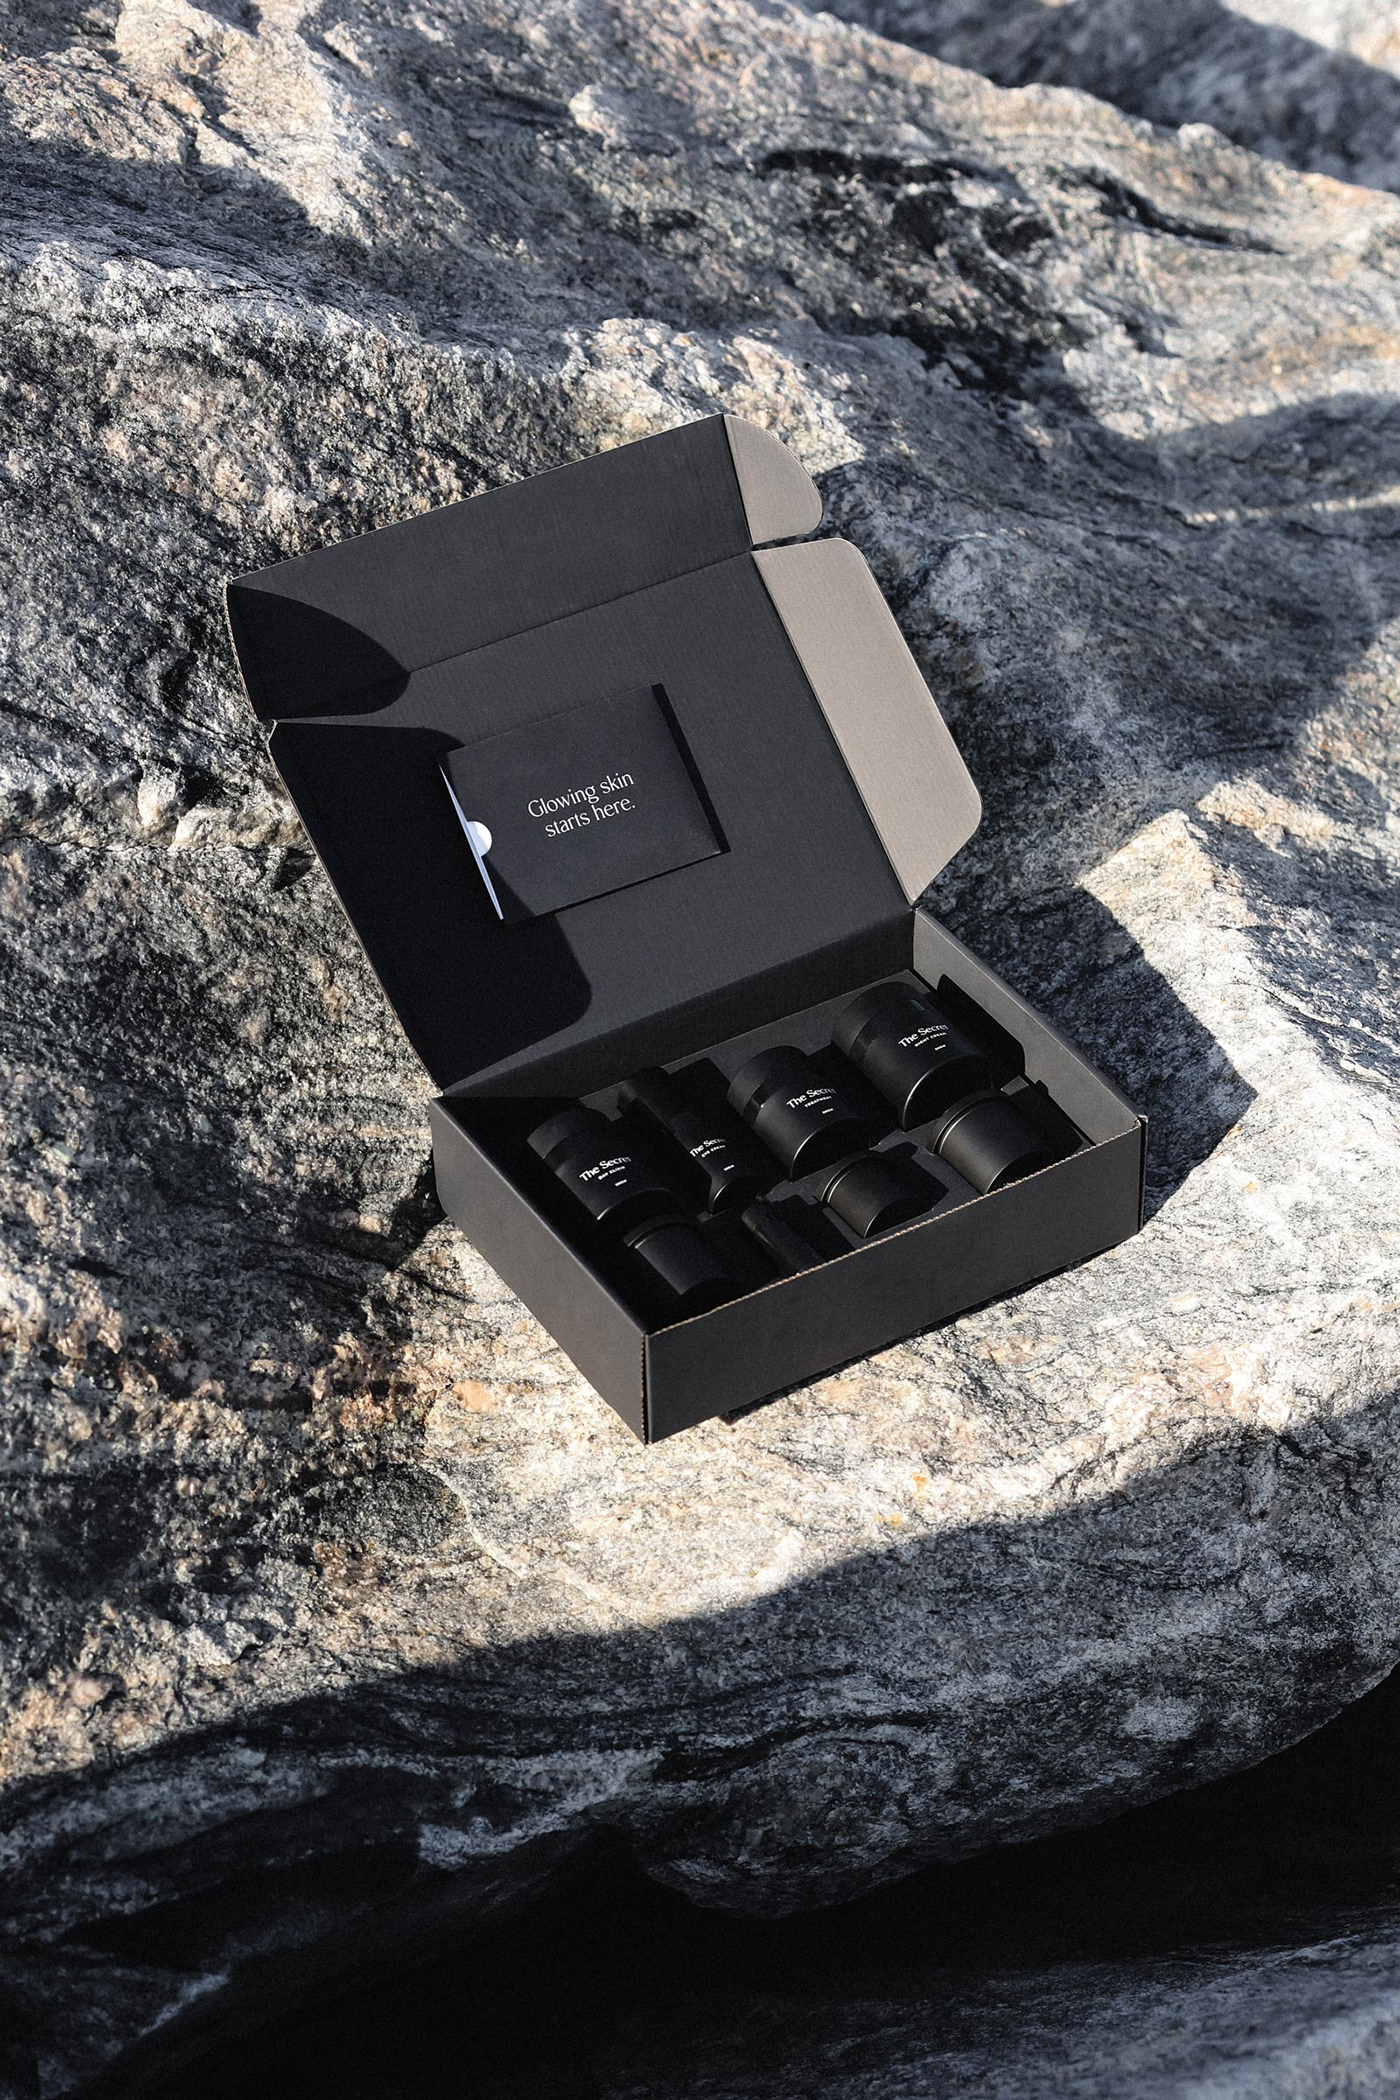 Open black ecom mailer box sits with products inside it on the rocks